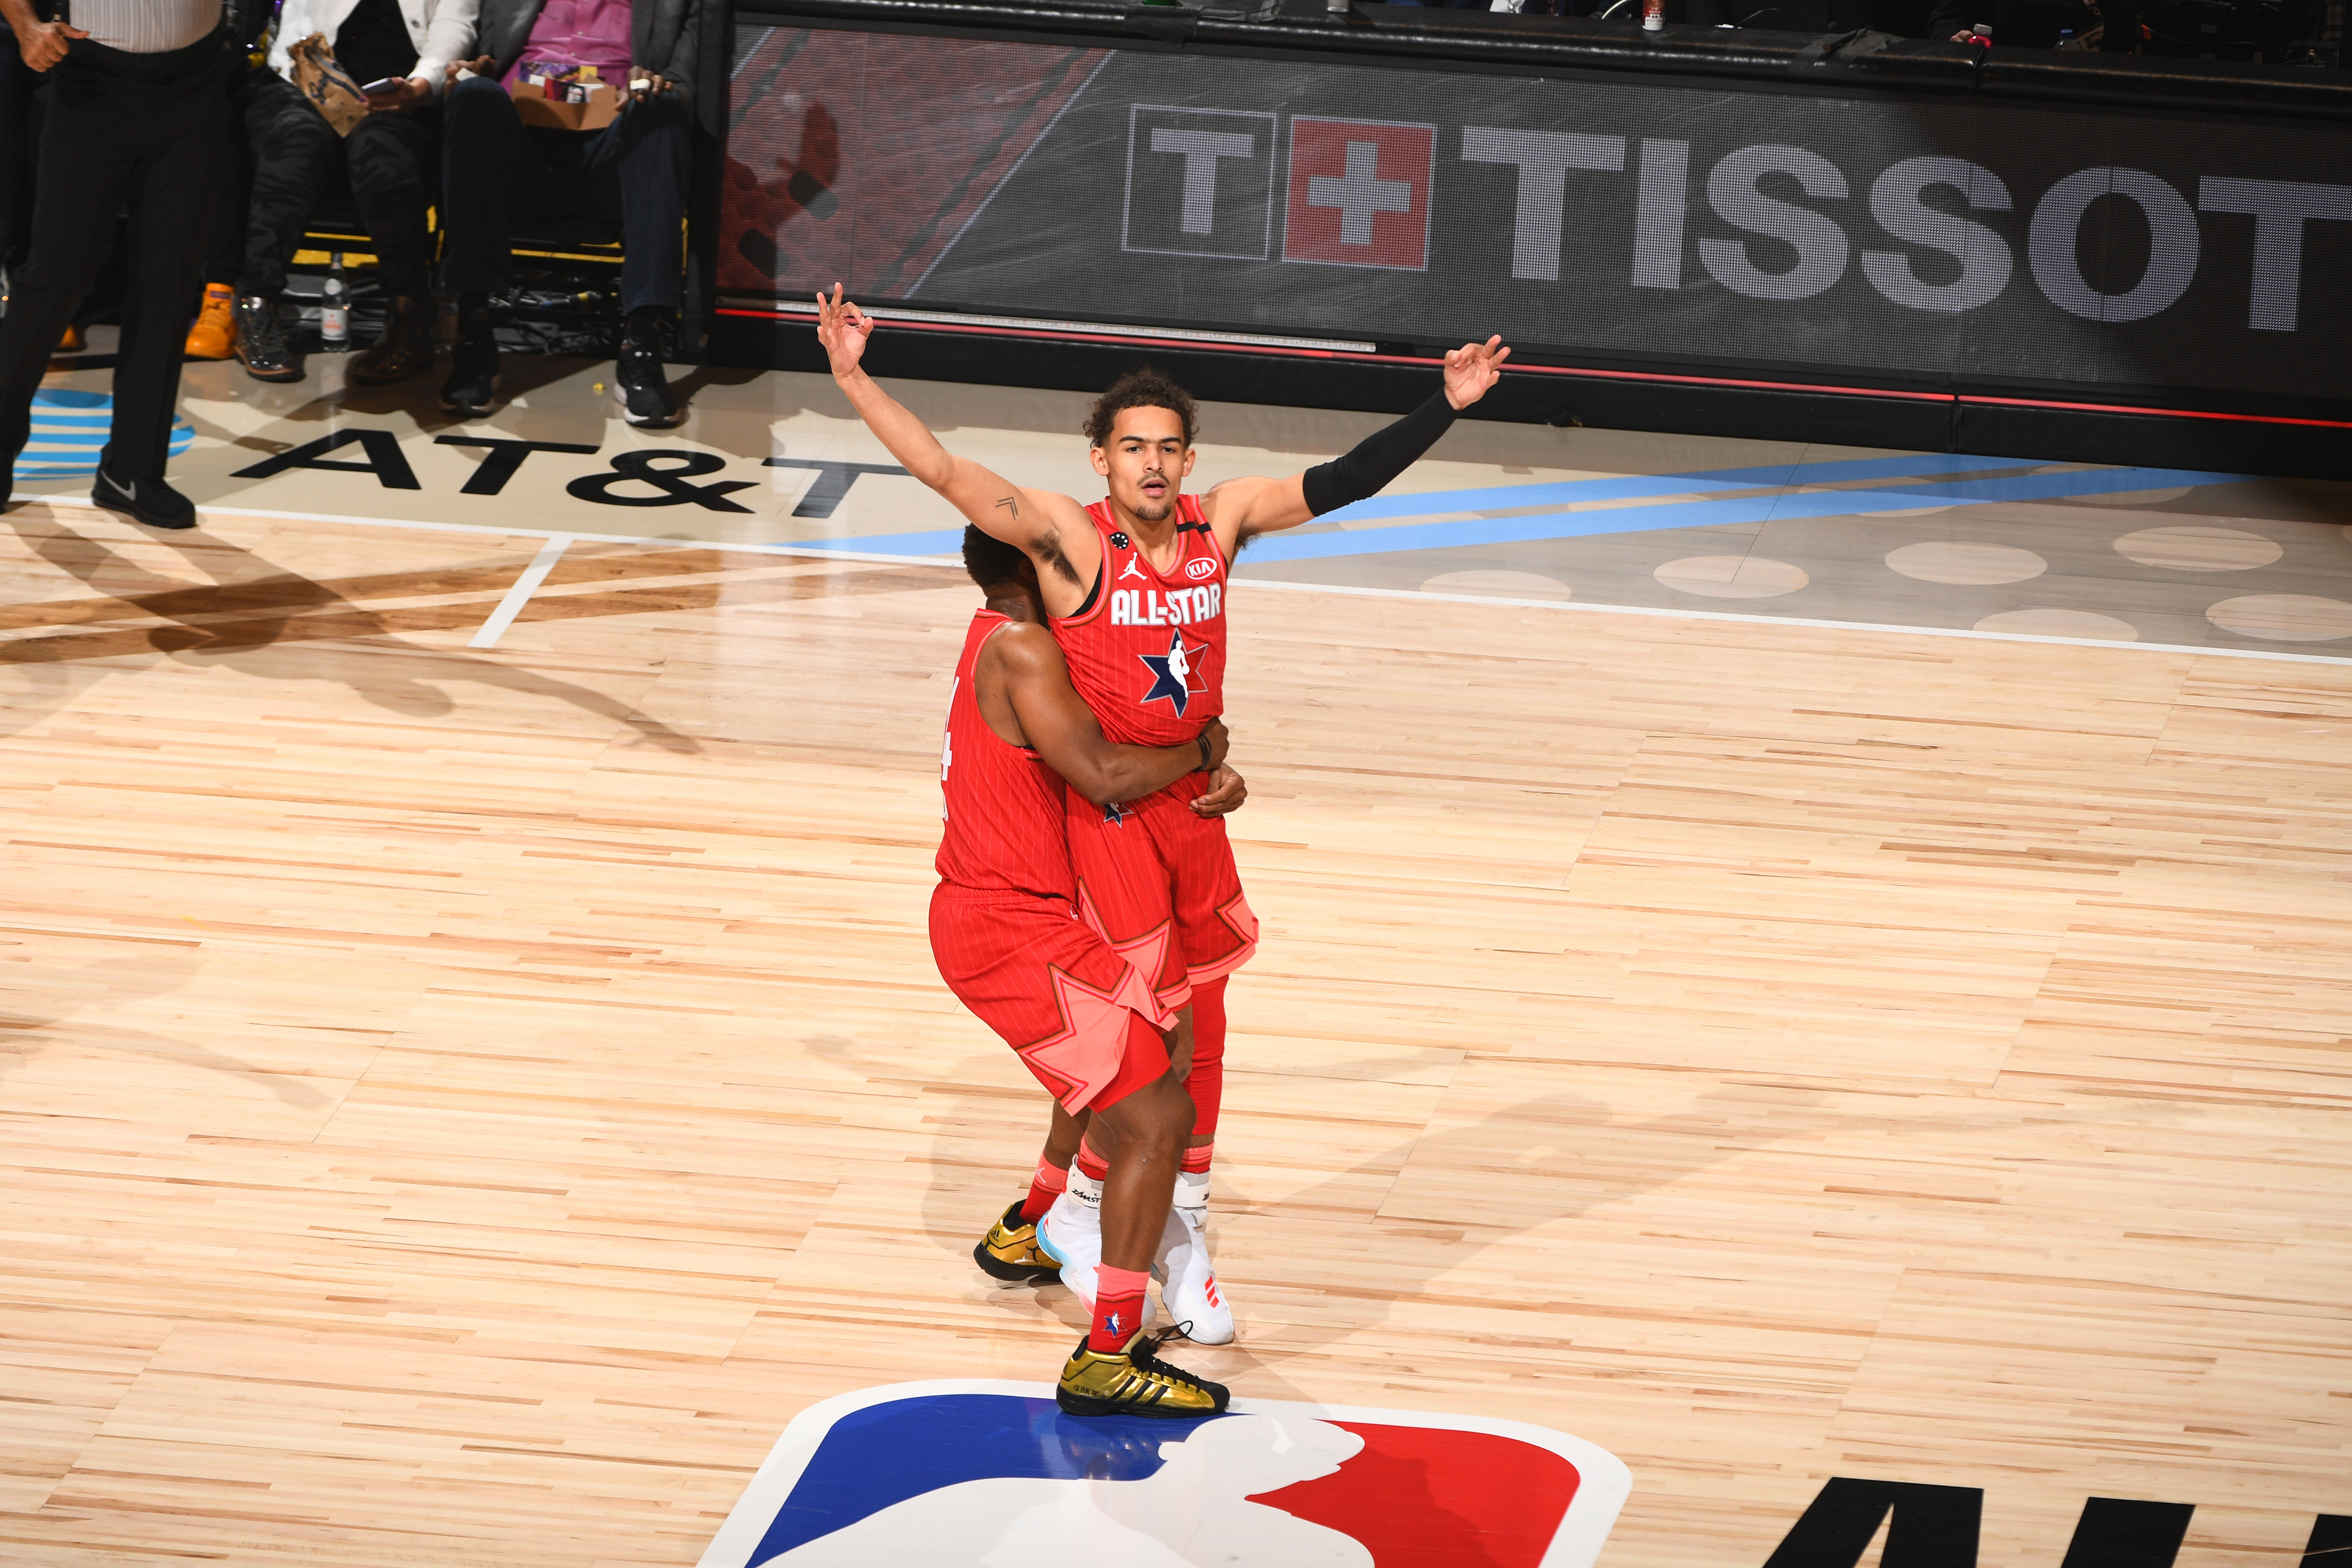 5 Crazy Moments From The NBA All Star Celebrity Game & Media Day